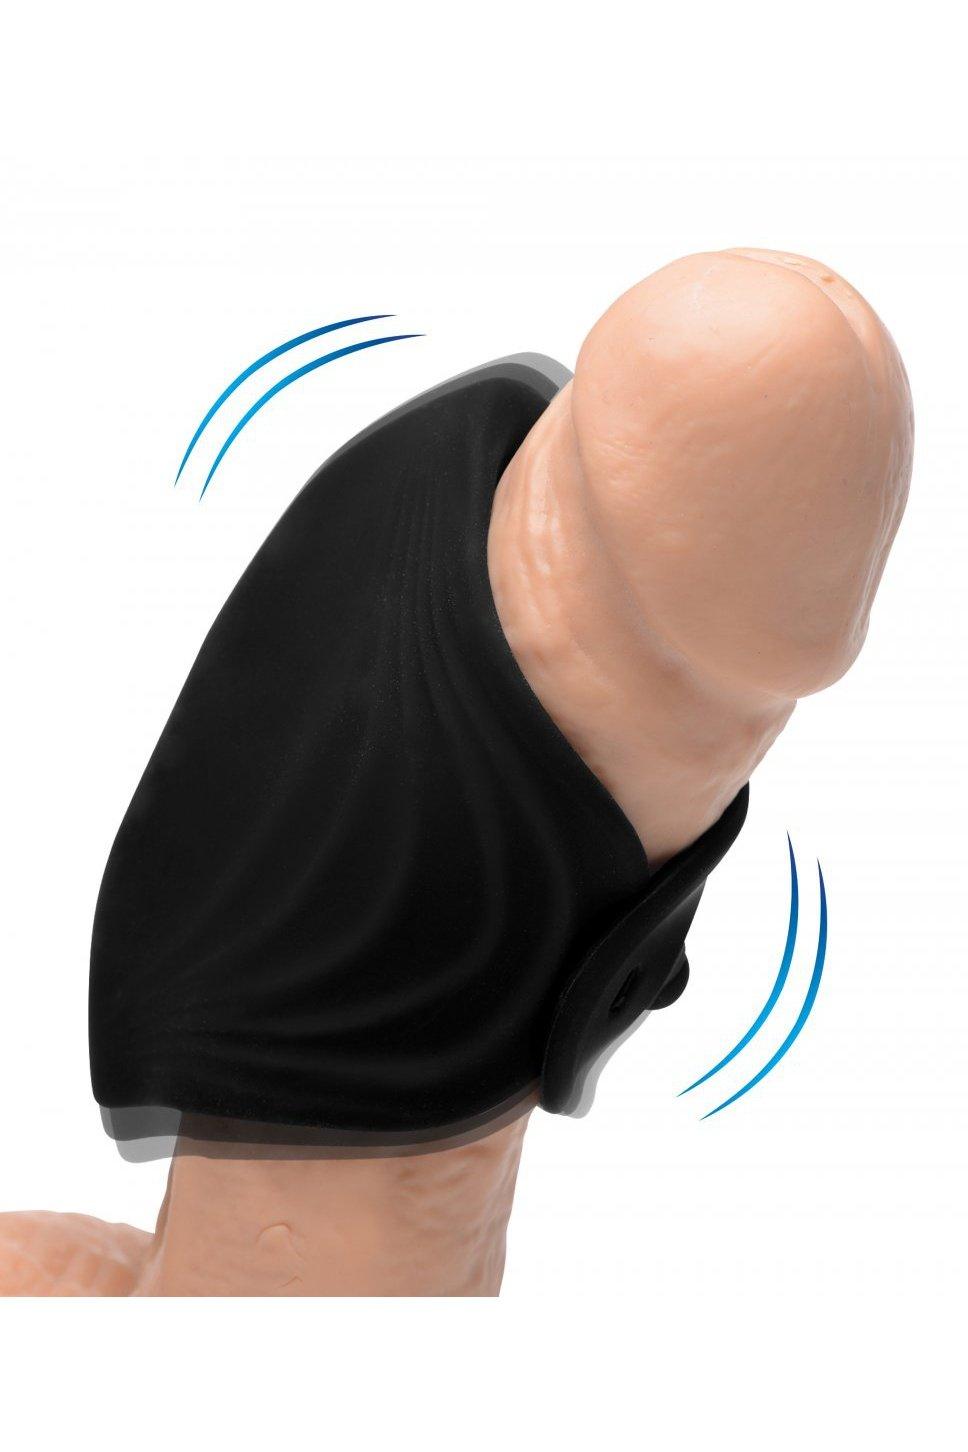 10X Pleasure Stroke Vibrating Silicone Penis Sleeve - Sex On the Go